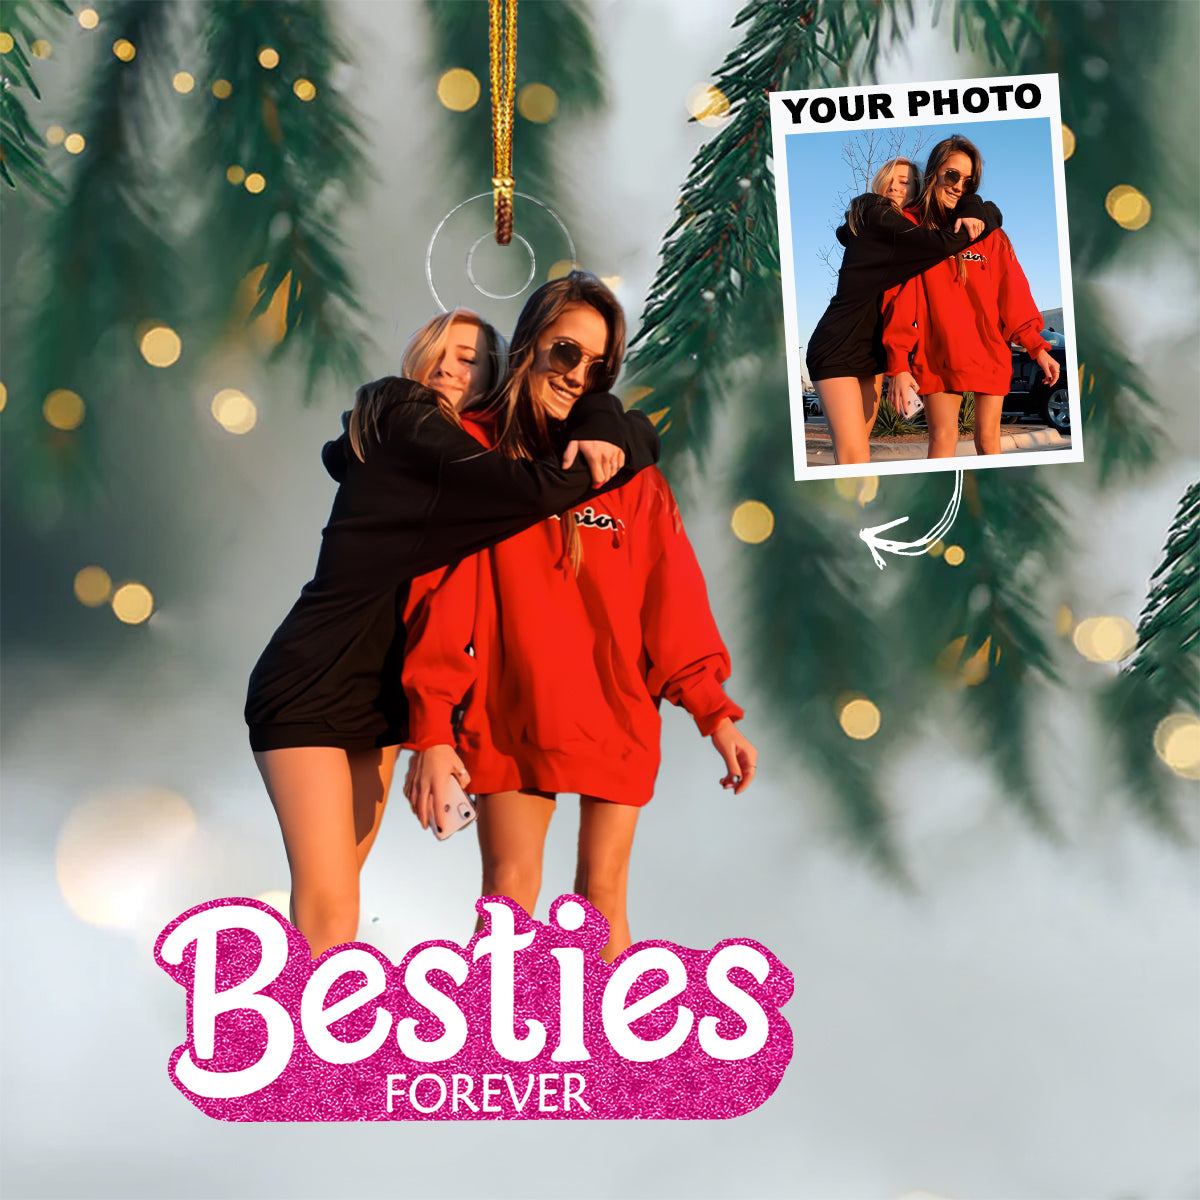 Besties Forever - Custom Photo Mica Ornament - Christmas, Birthday Gift For Friends, Besties UPL0PD026